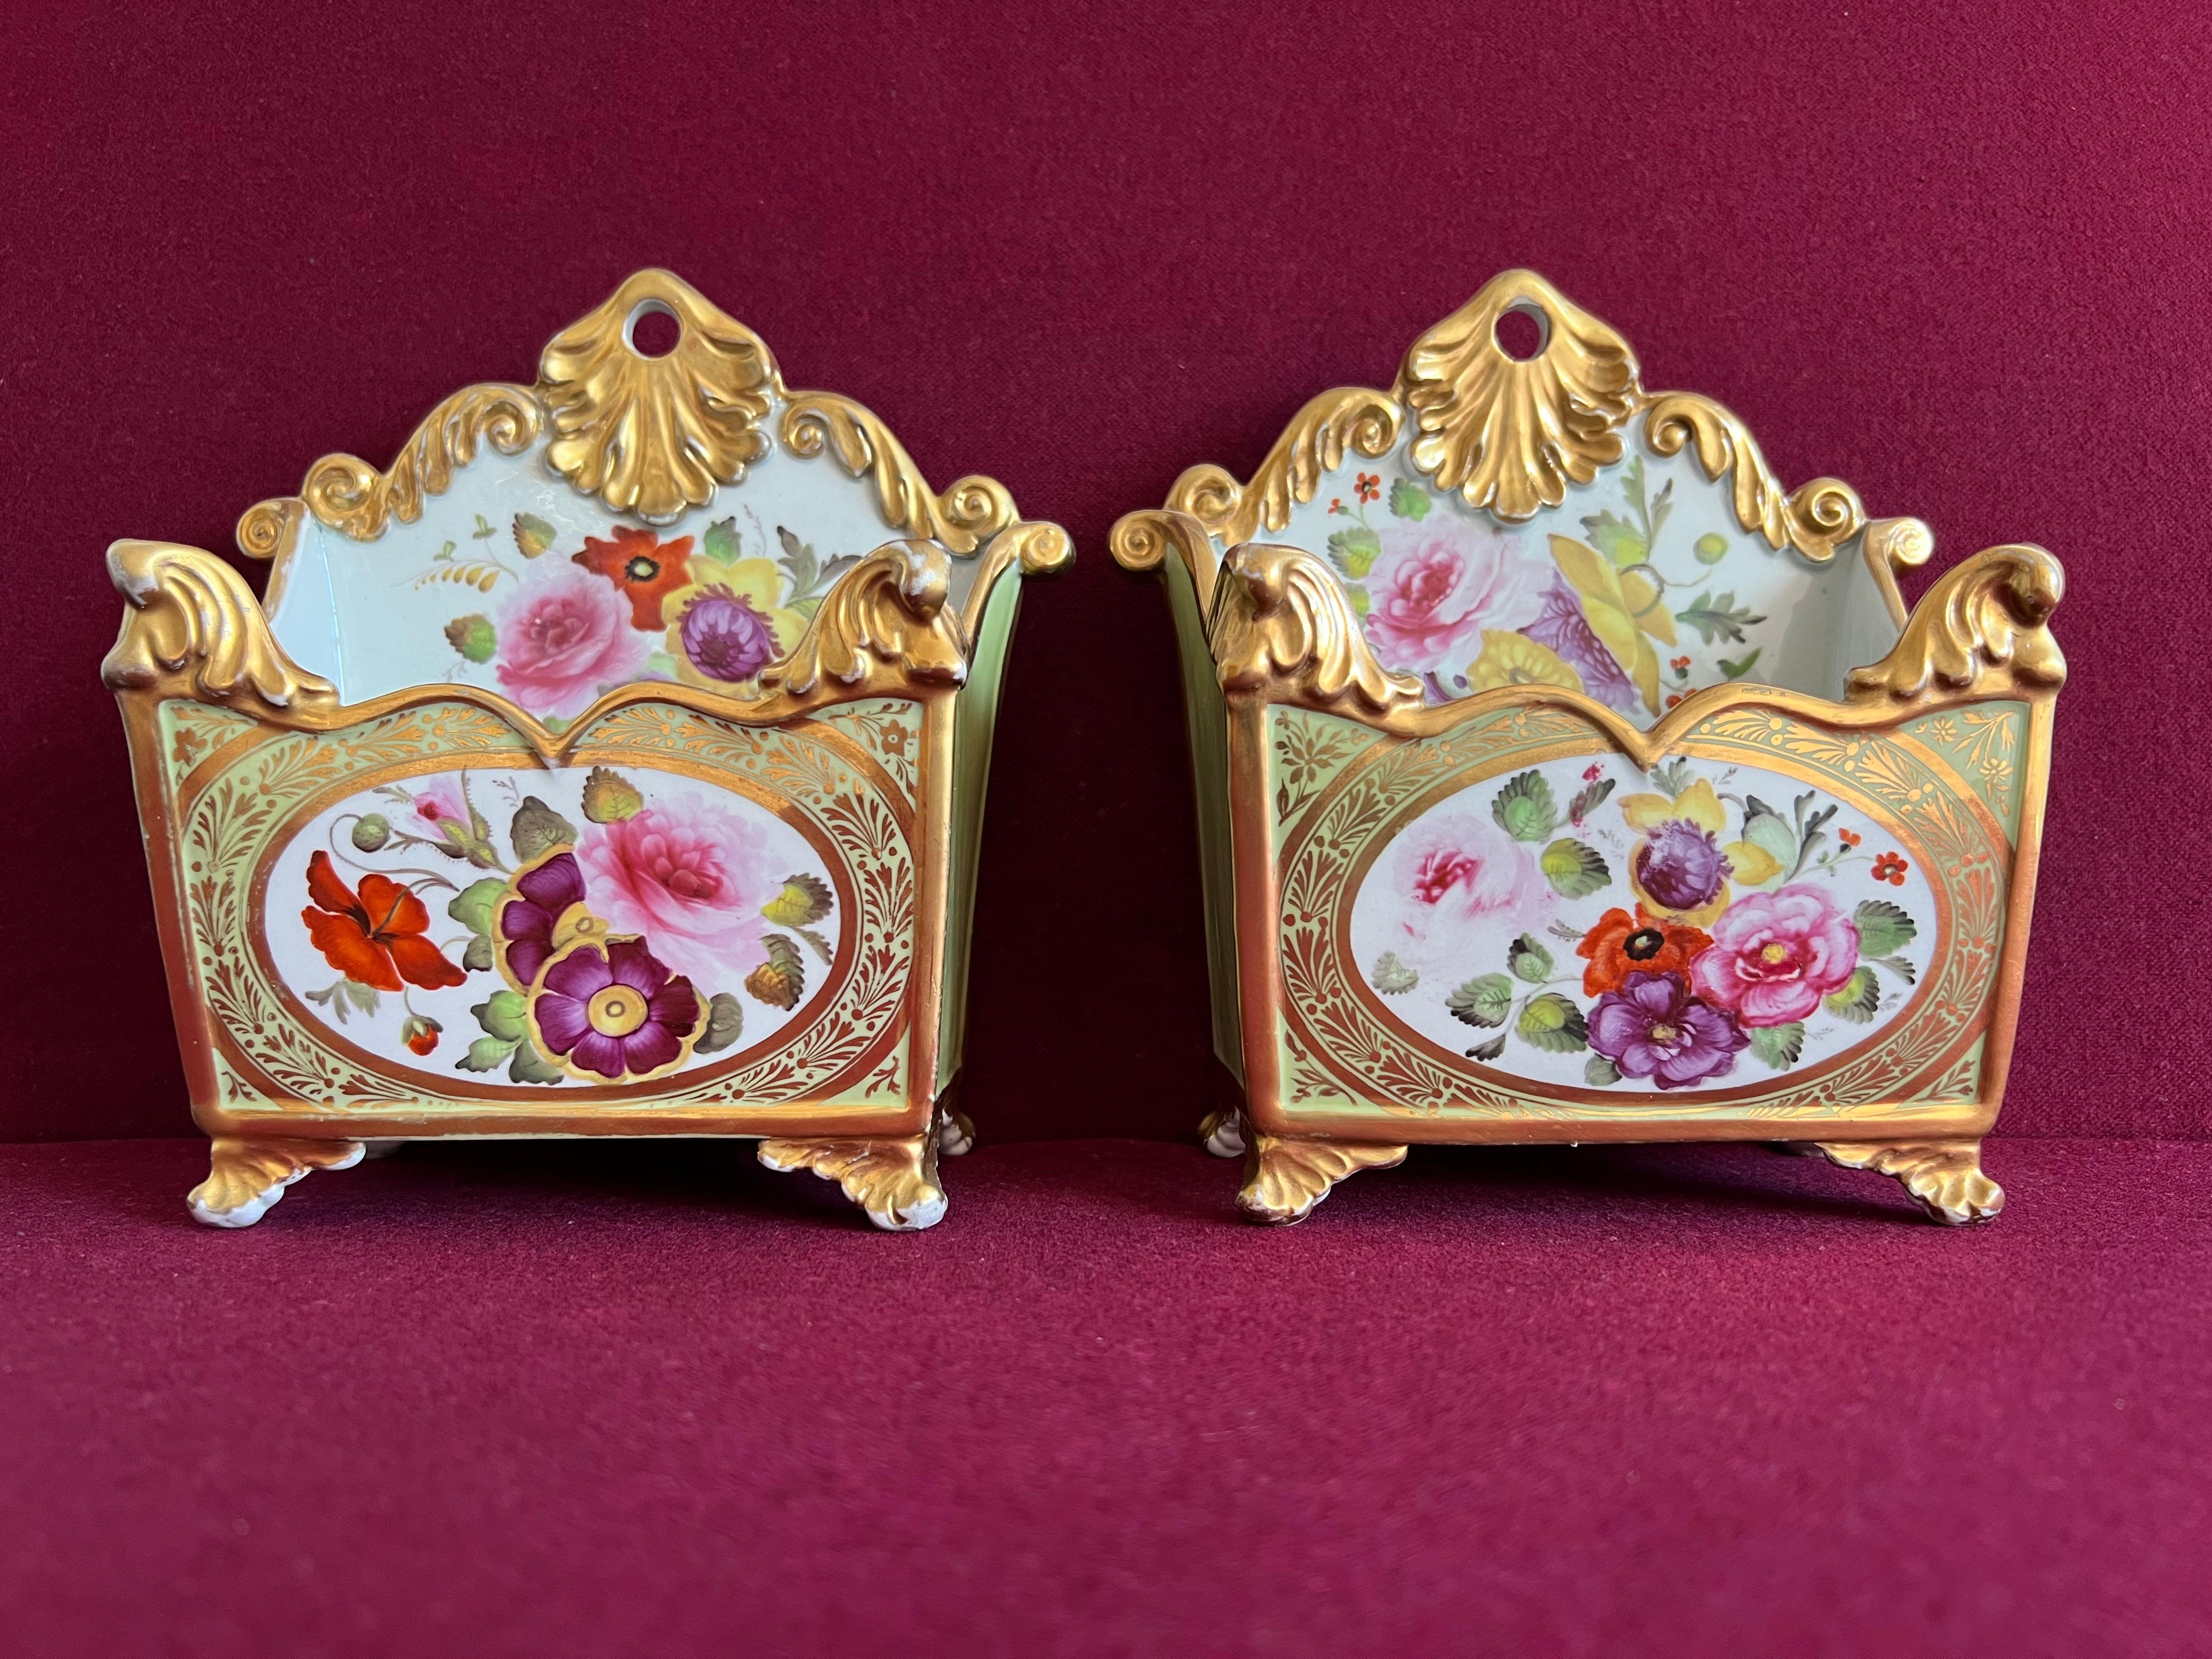 A pair of Mason's Ironstone China Card Racks c.1820-1825.  Finely decorated with bouquets of summer flowers with a sage green ground and gilding. Impressed mark 'Mason's Ironstone China' to the base of one. These letter racks are mentioned in the